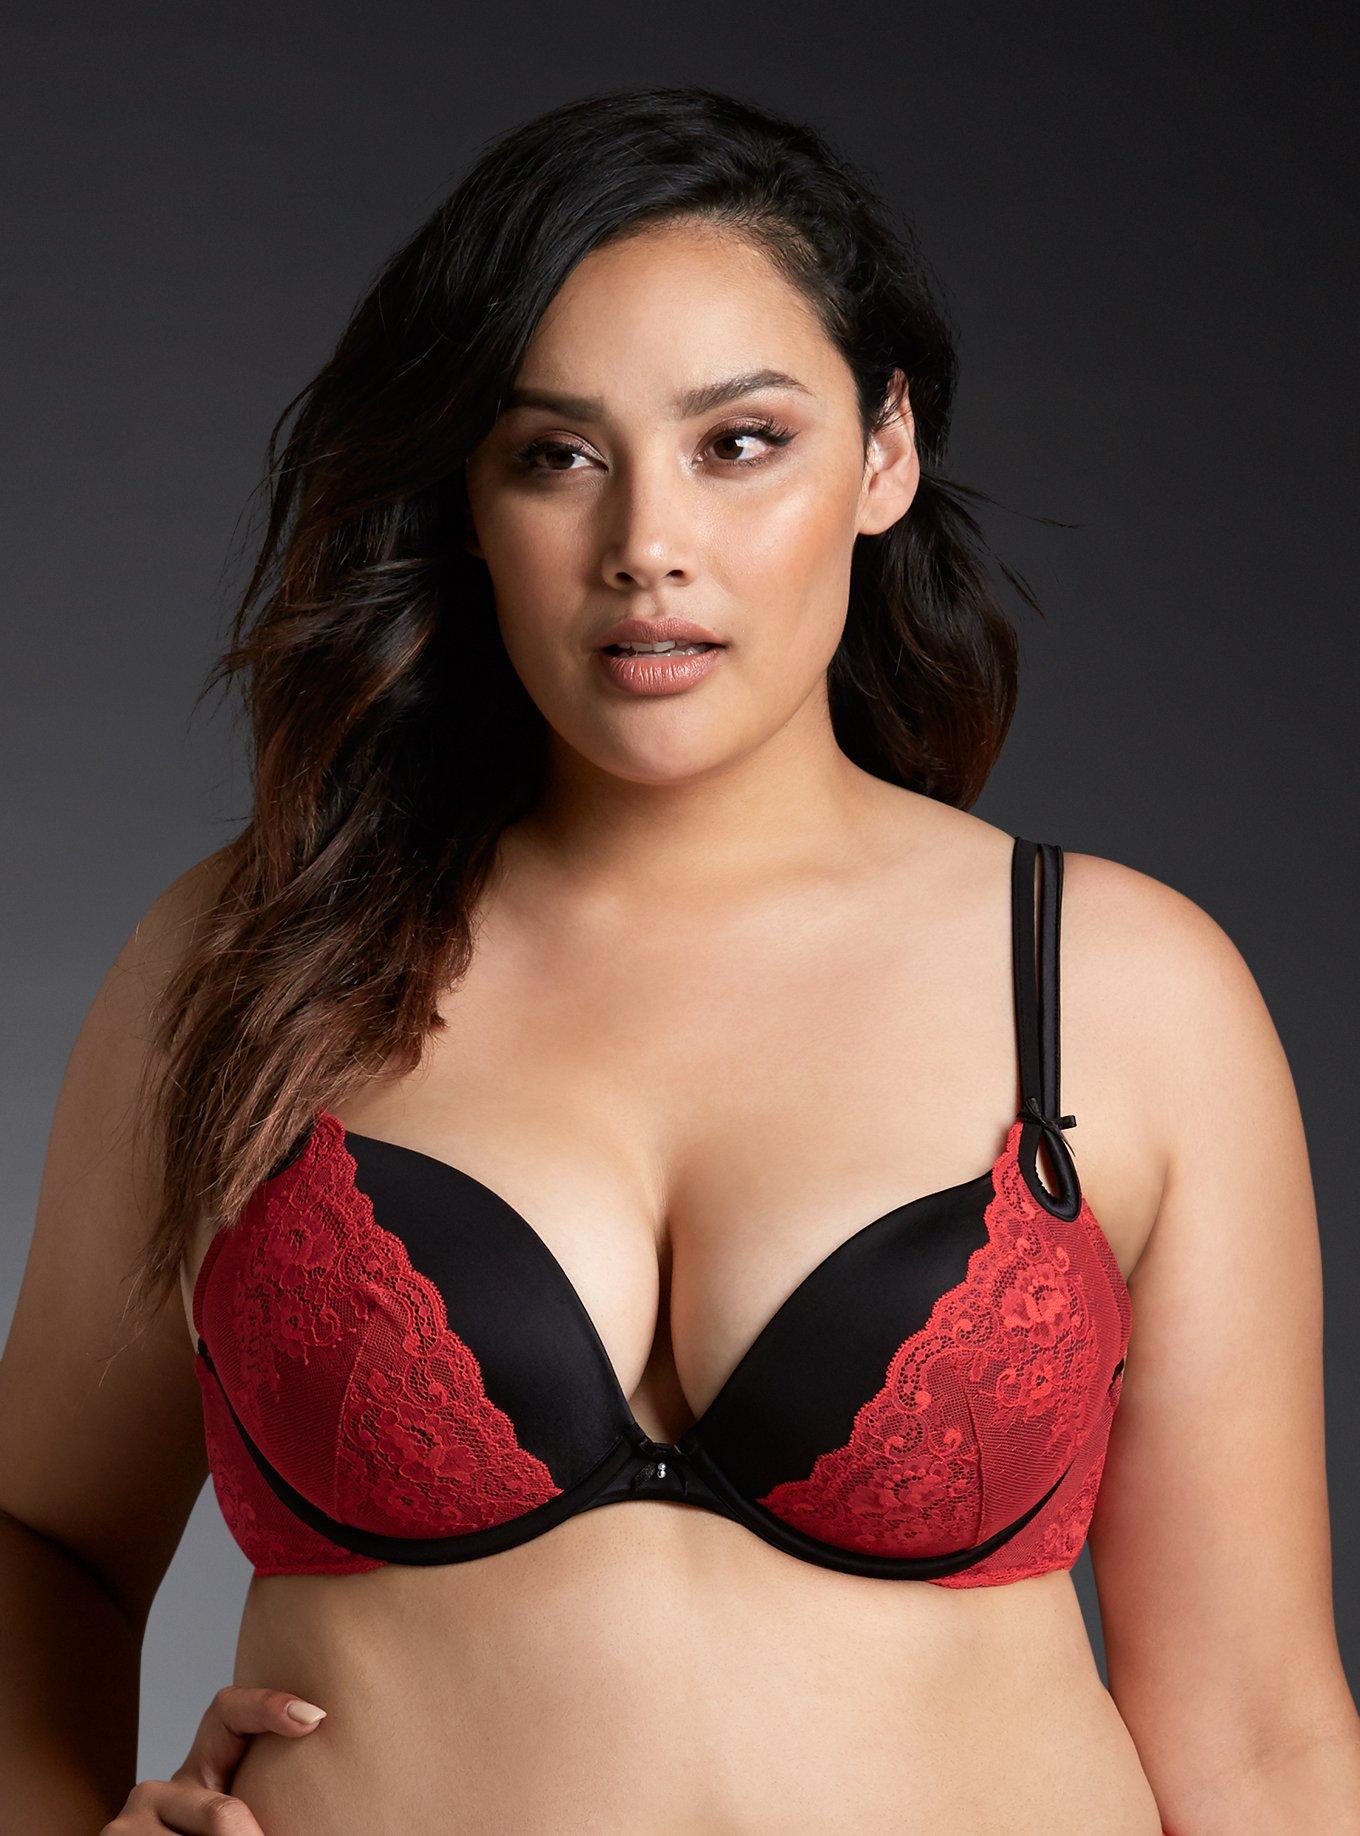 Classic push-up bra, lace overlay, A to F-cup